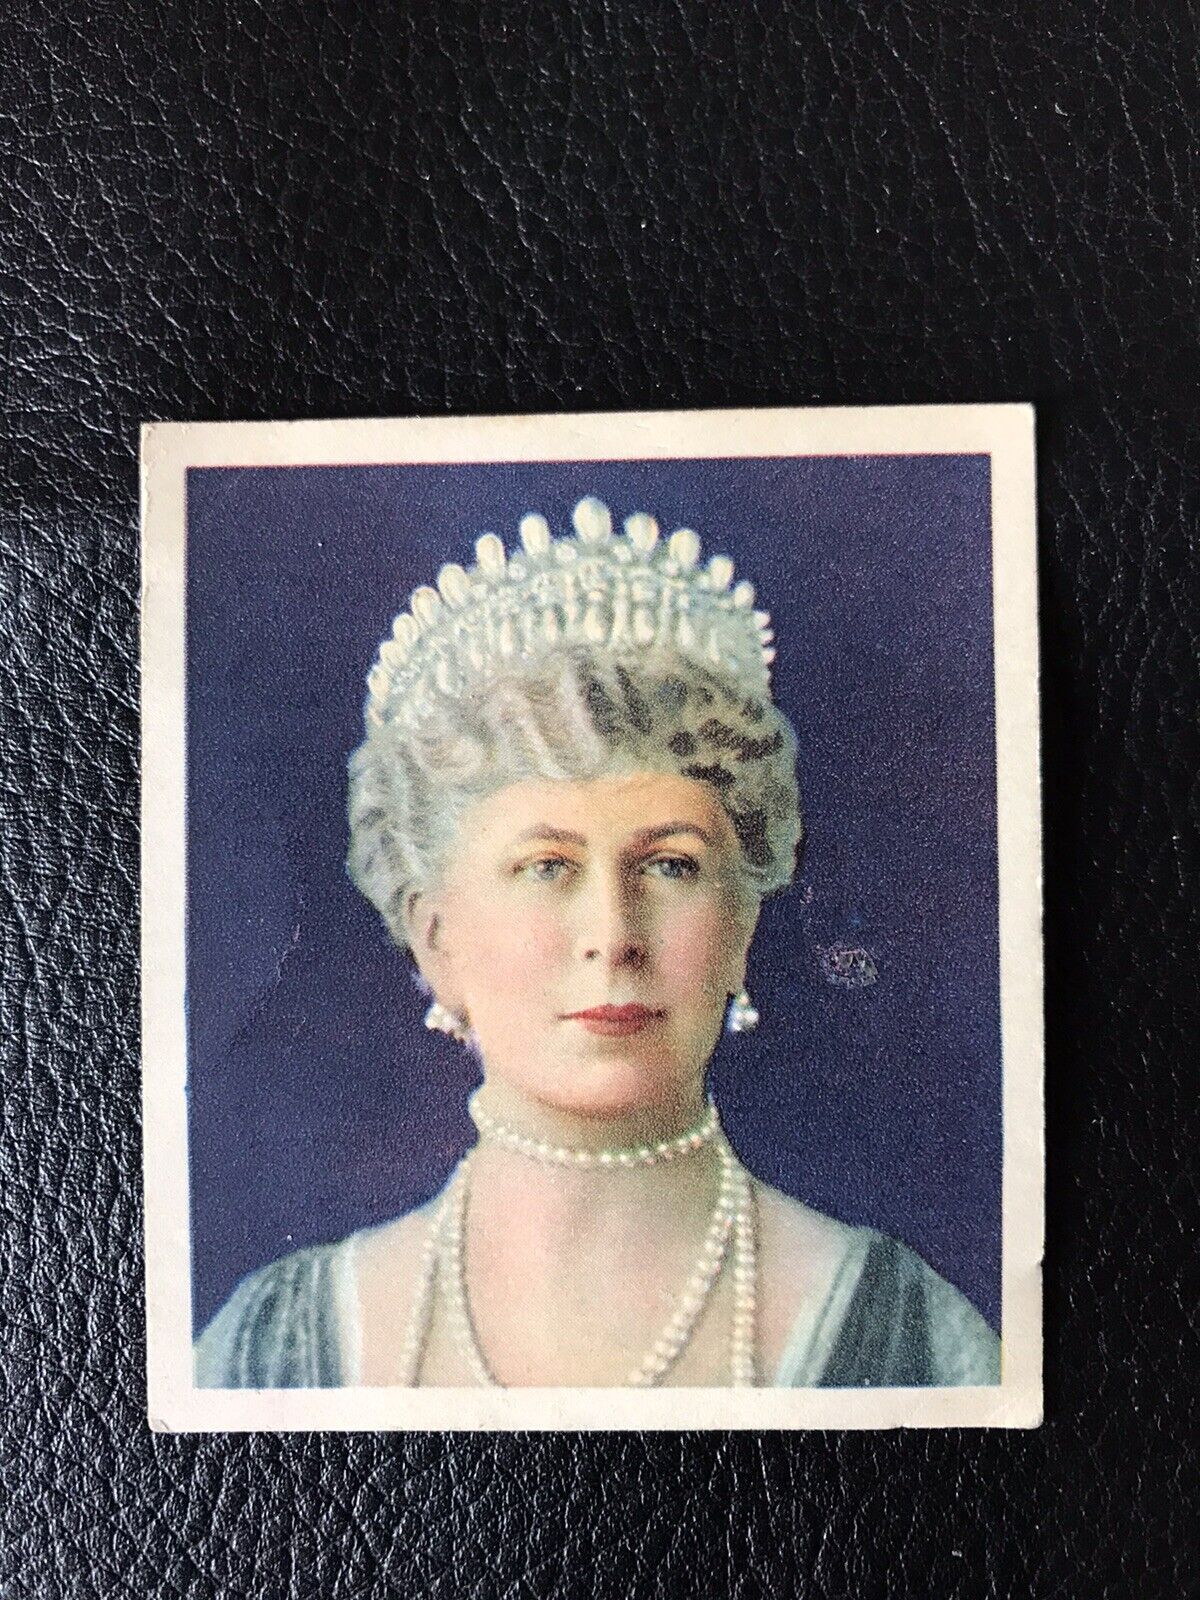 1935 GODFREY PHILLIPS CIGARETTES SPECIAL JUBILEE YEAR SERIES #2 THE QUEEN MARY